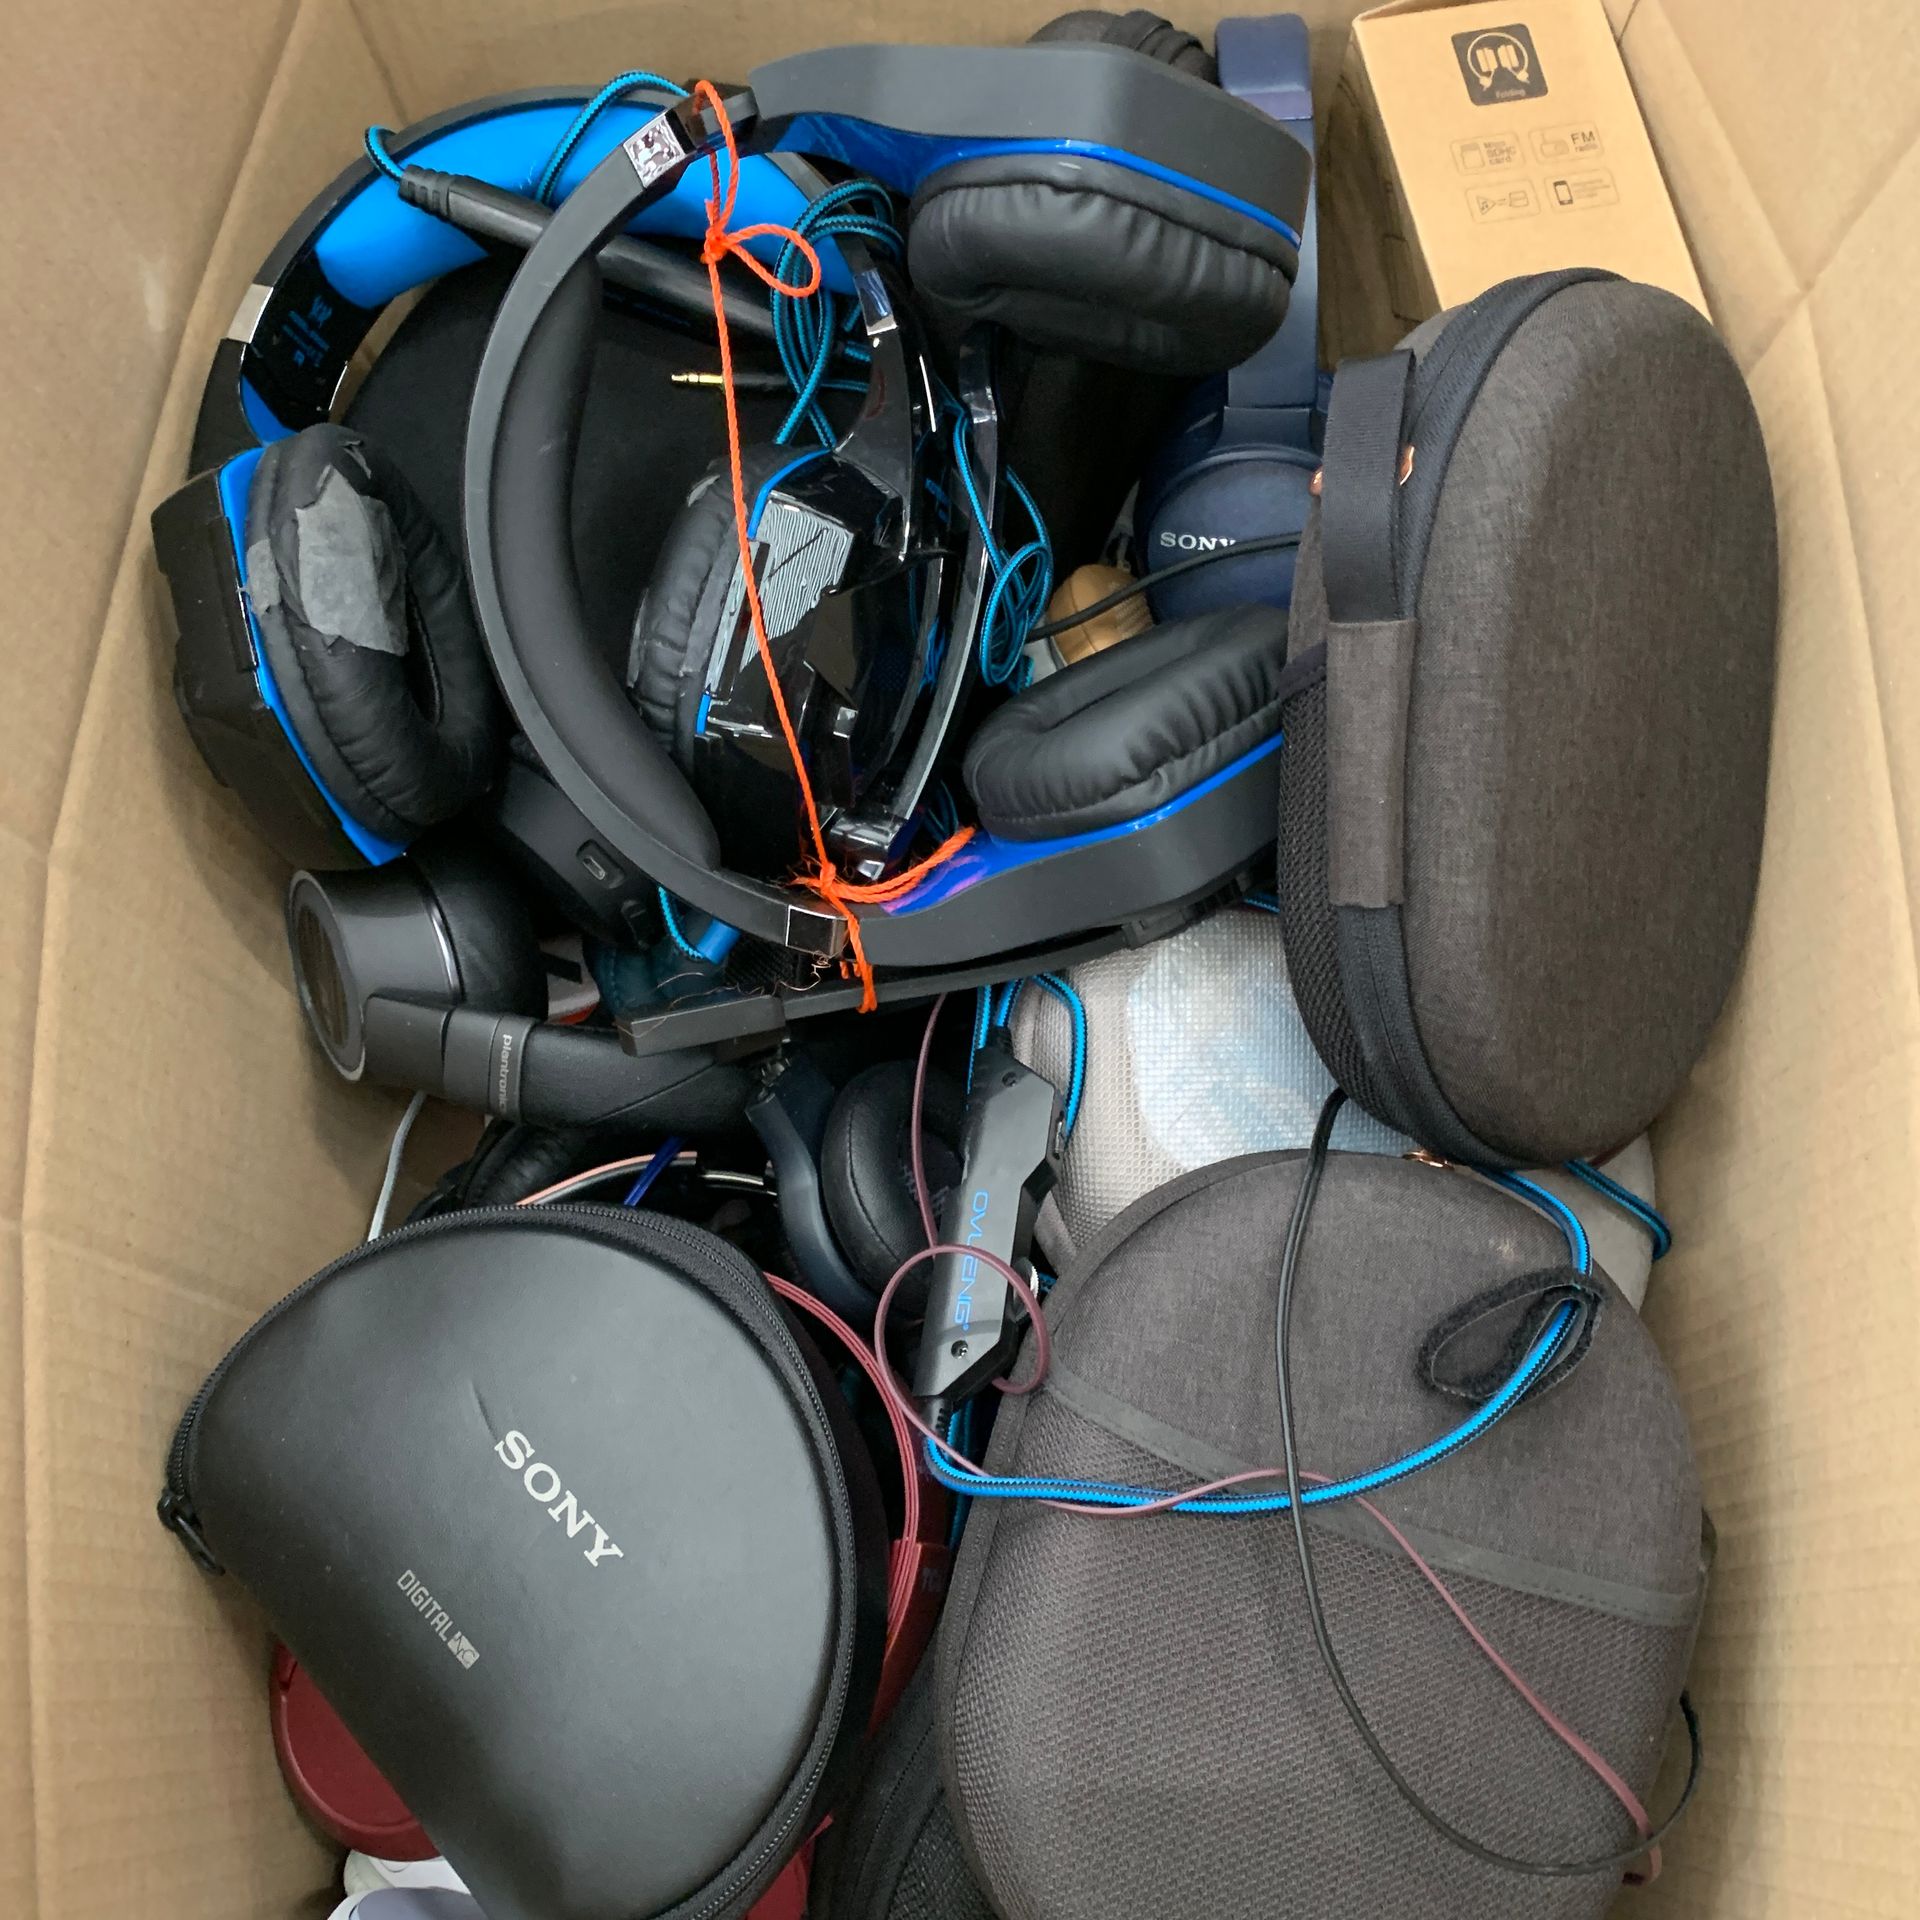 Null Lot of 40 Used Audio Headsets SONY, JBL and others